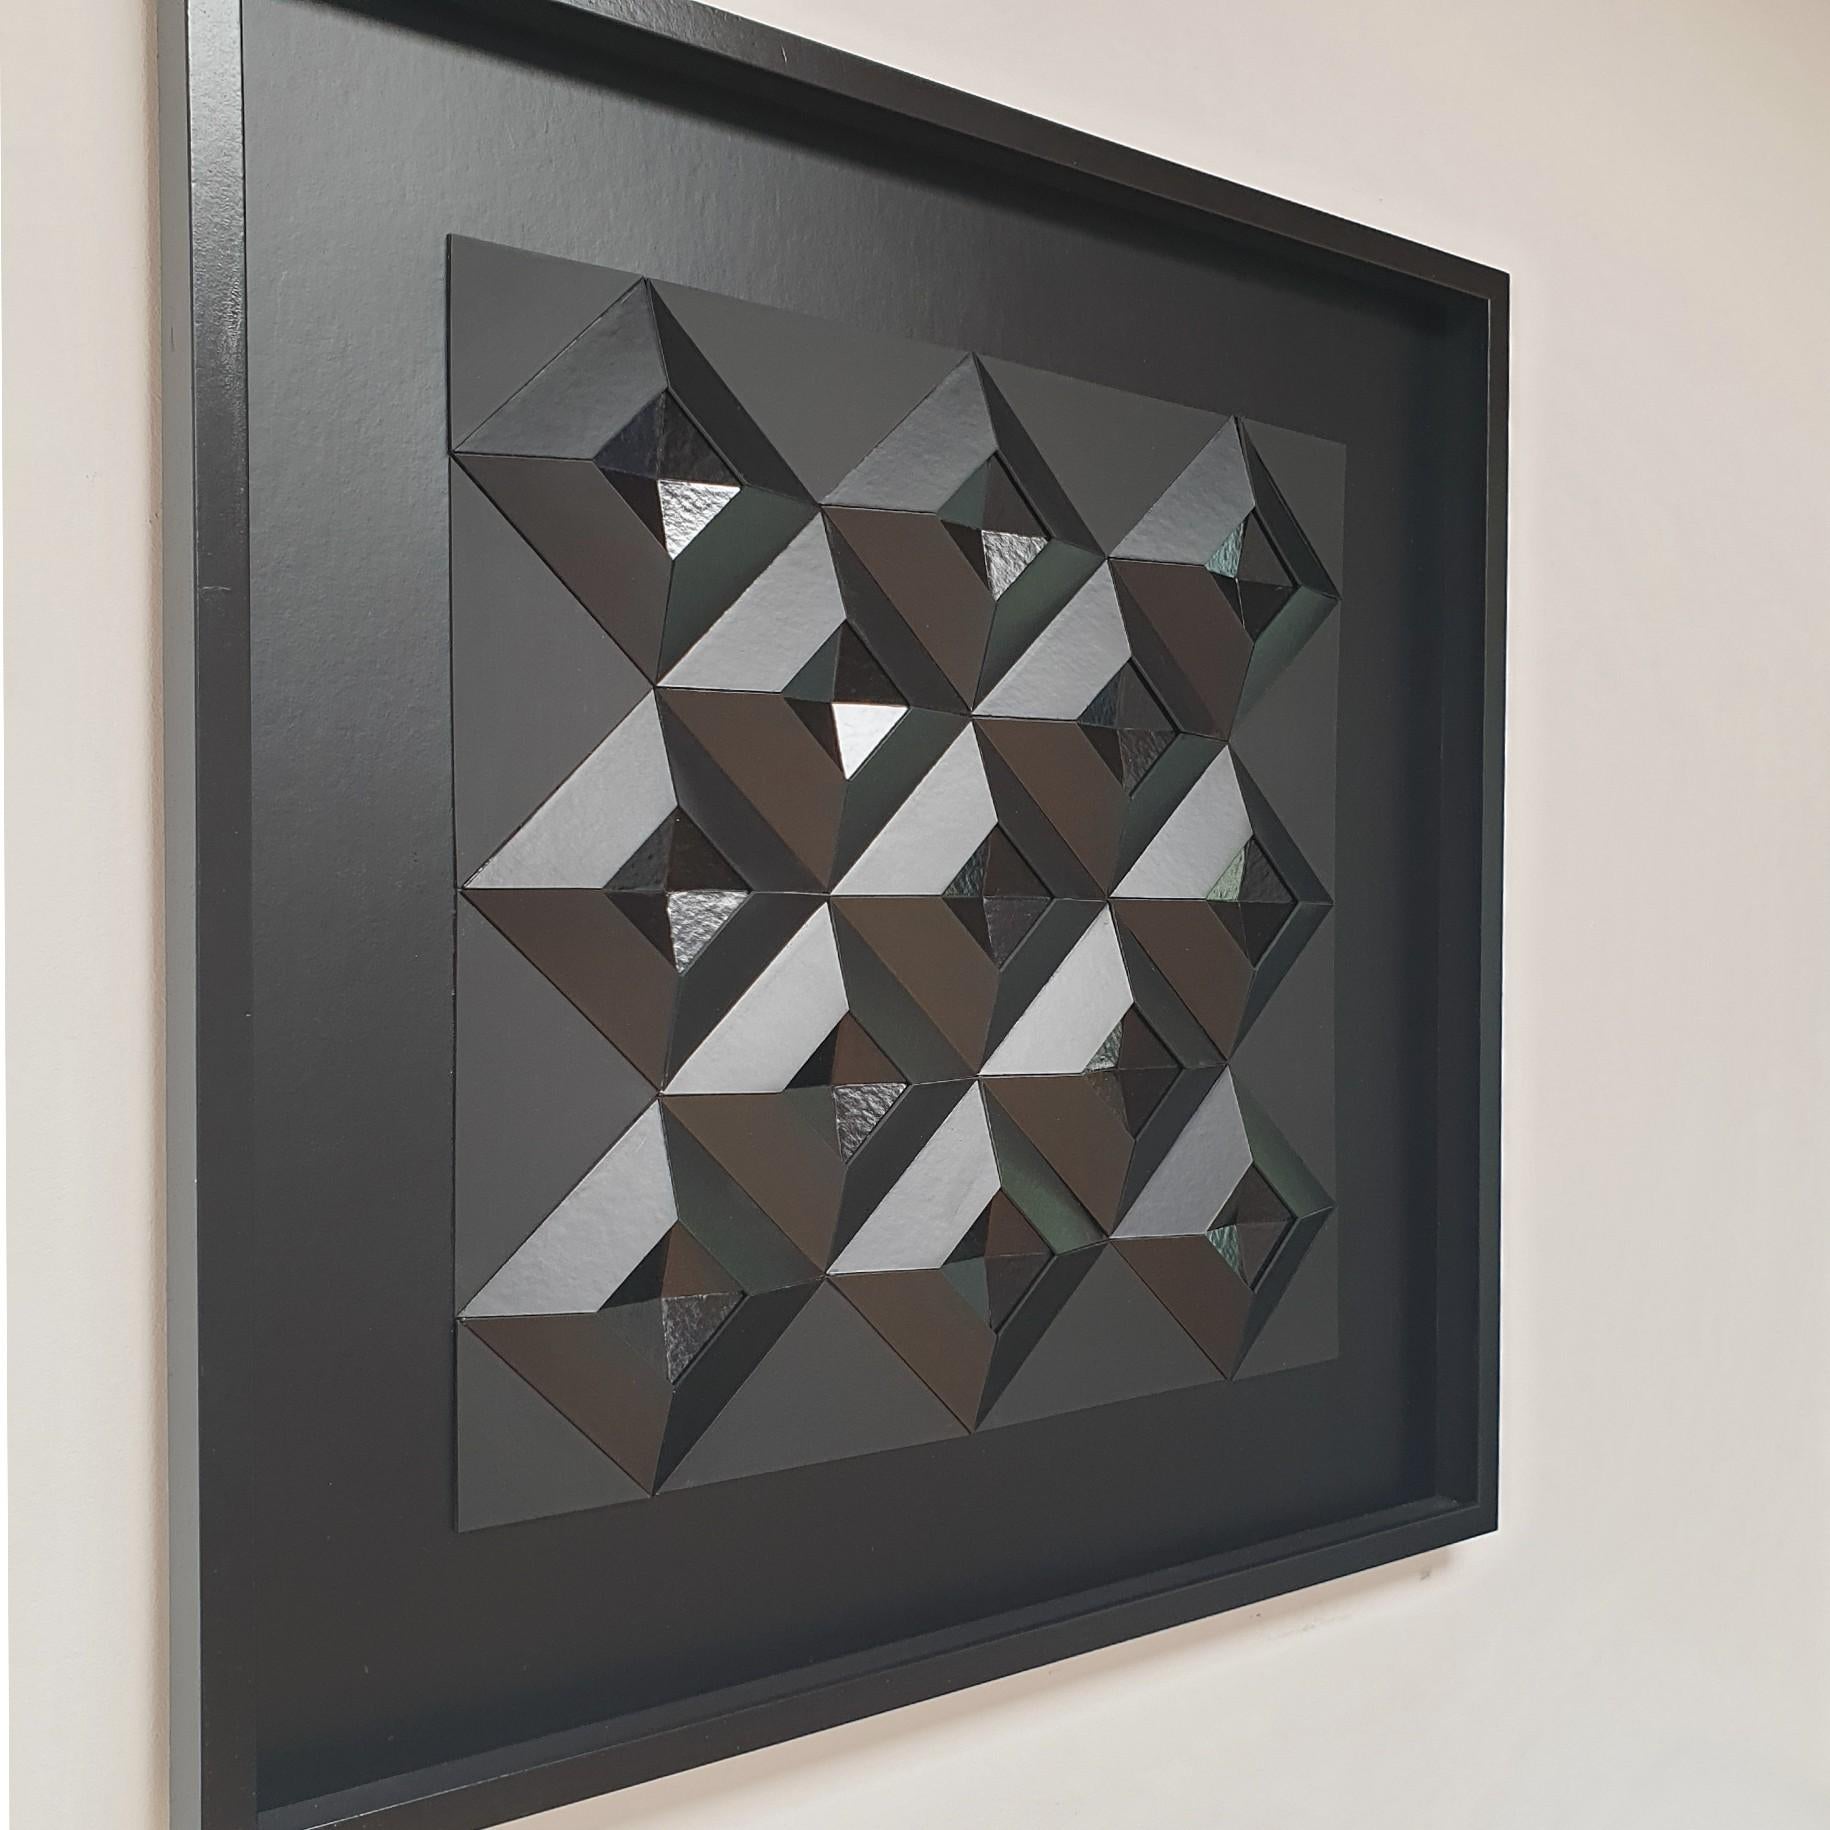 Diamond shape variation no. 6 - contemporary modern abstract painting relief - Gray Abstract Painting by Eef de Graaf